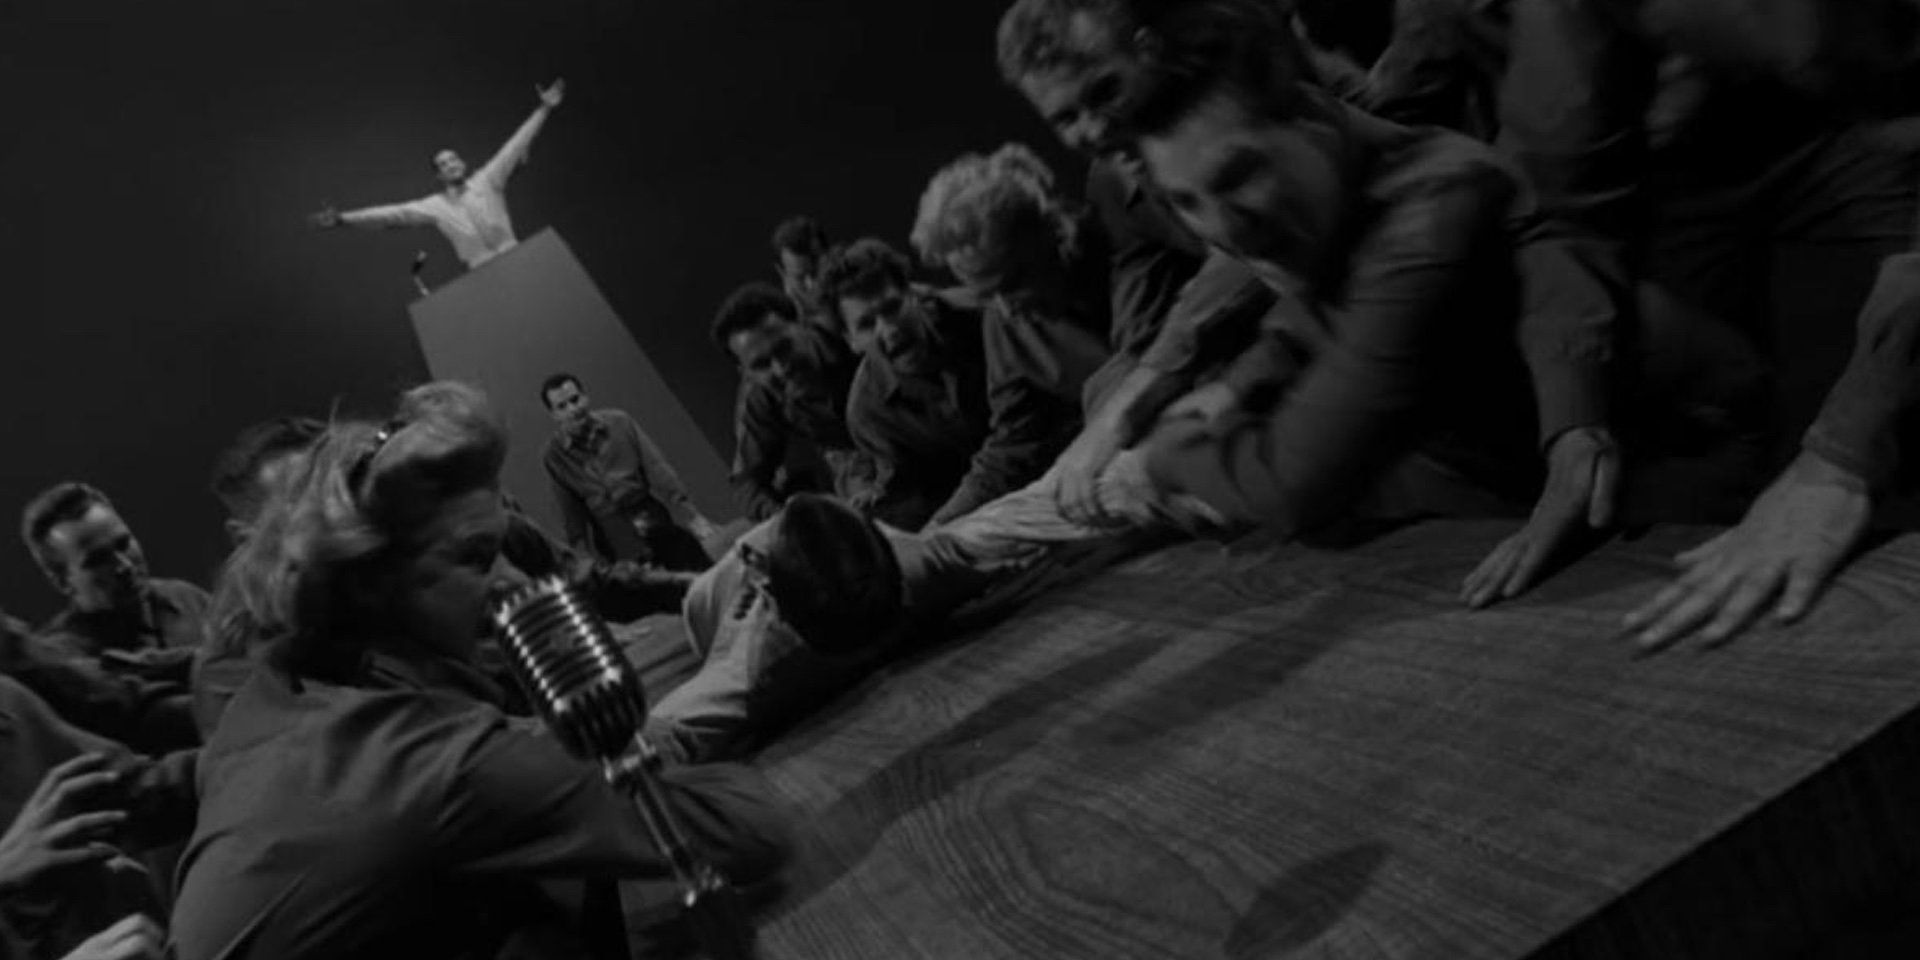 Black and white image of People shouting at a table during a trial in The Twilight Zone